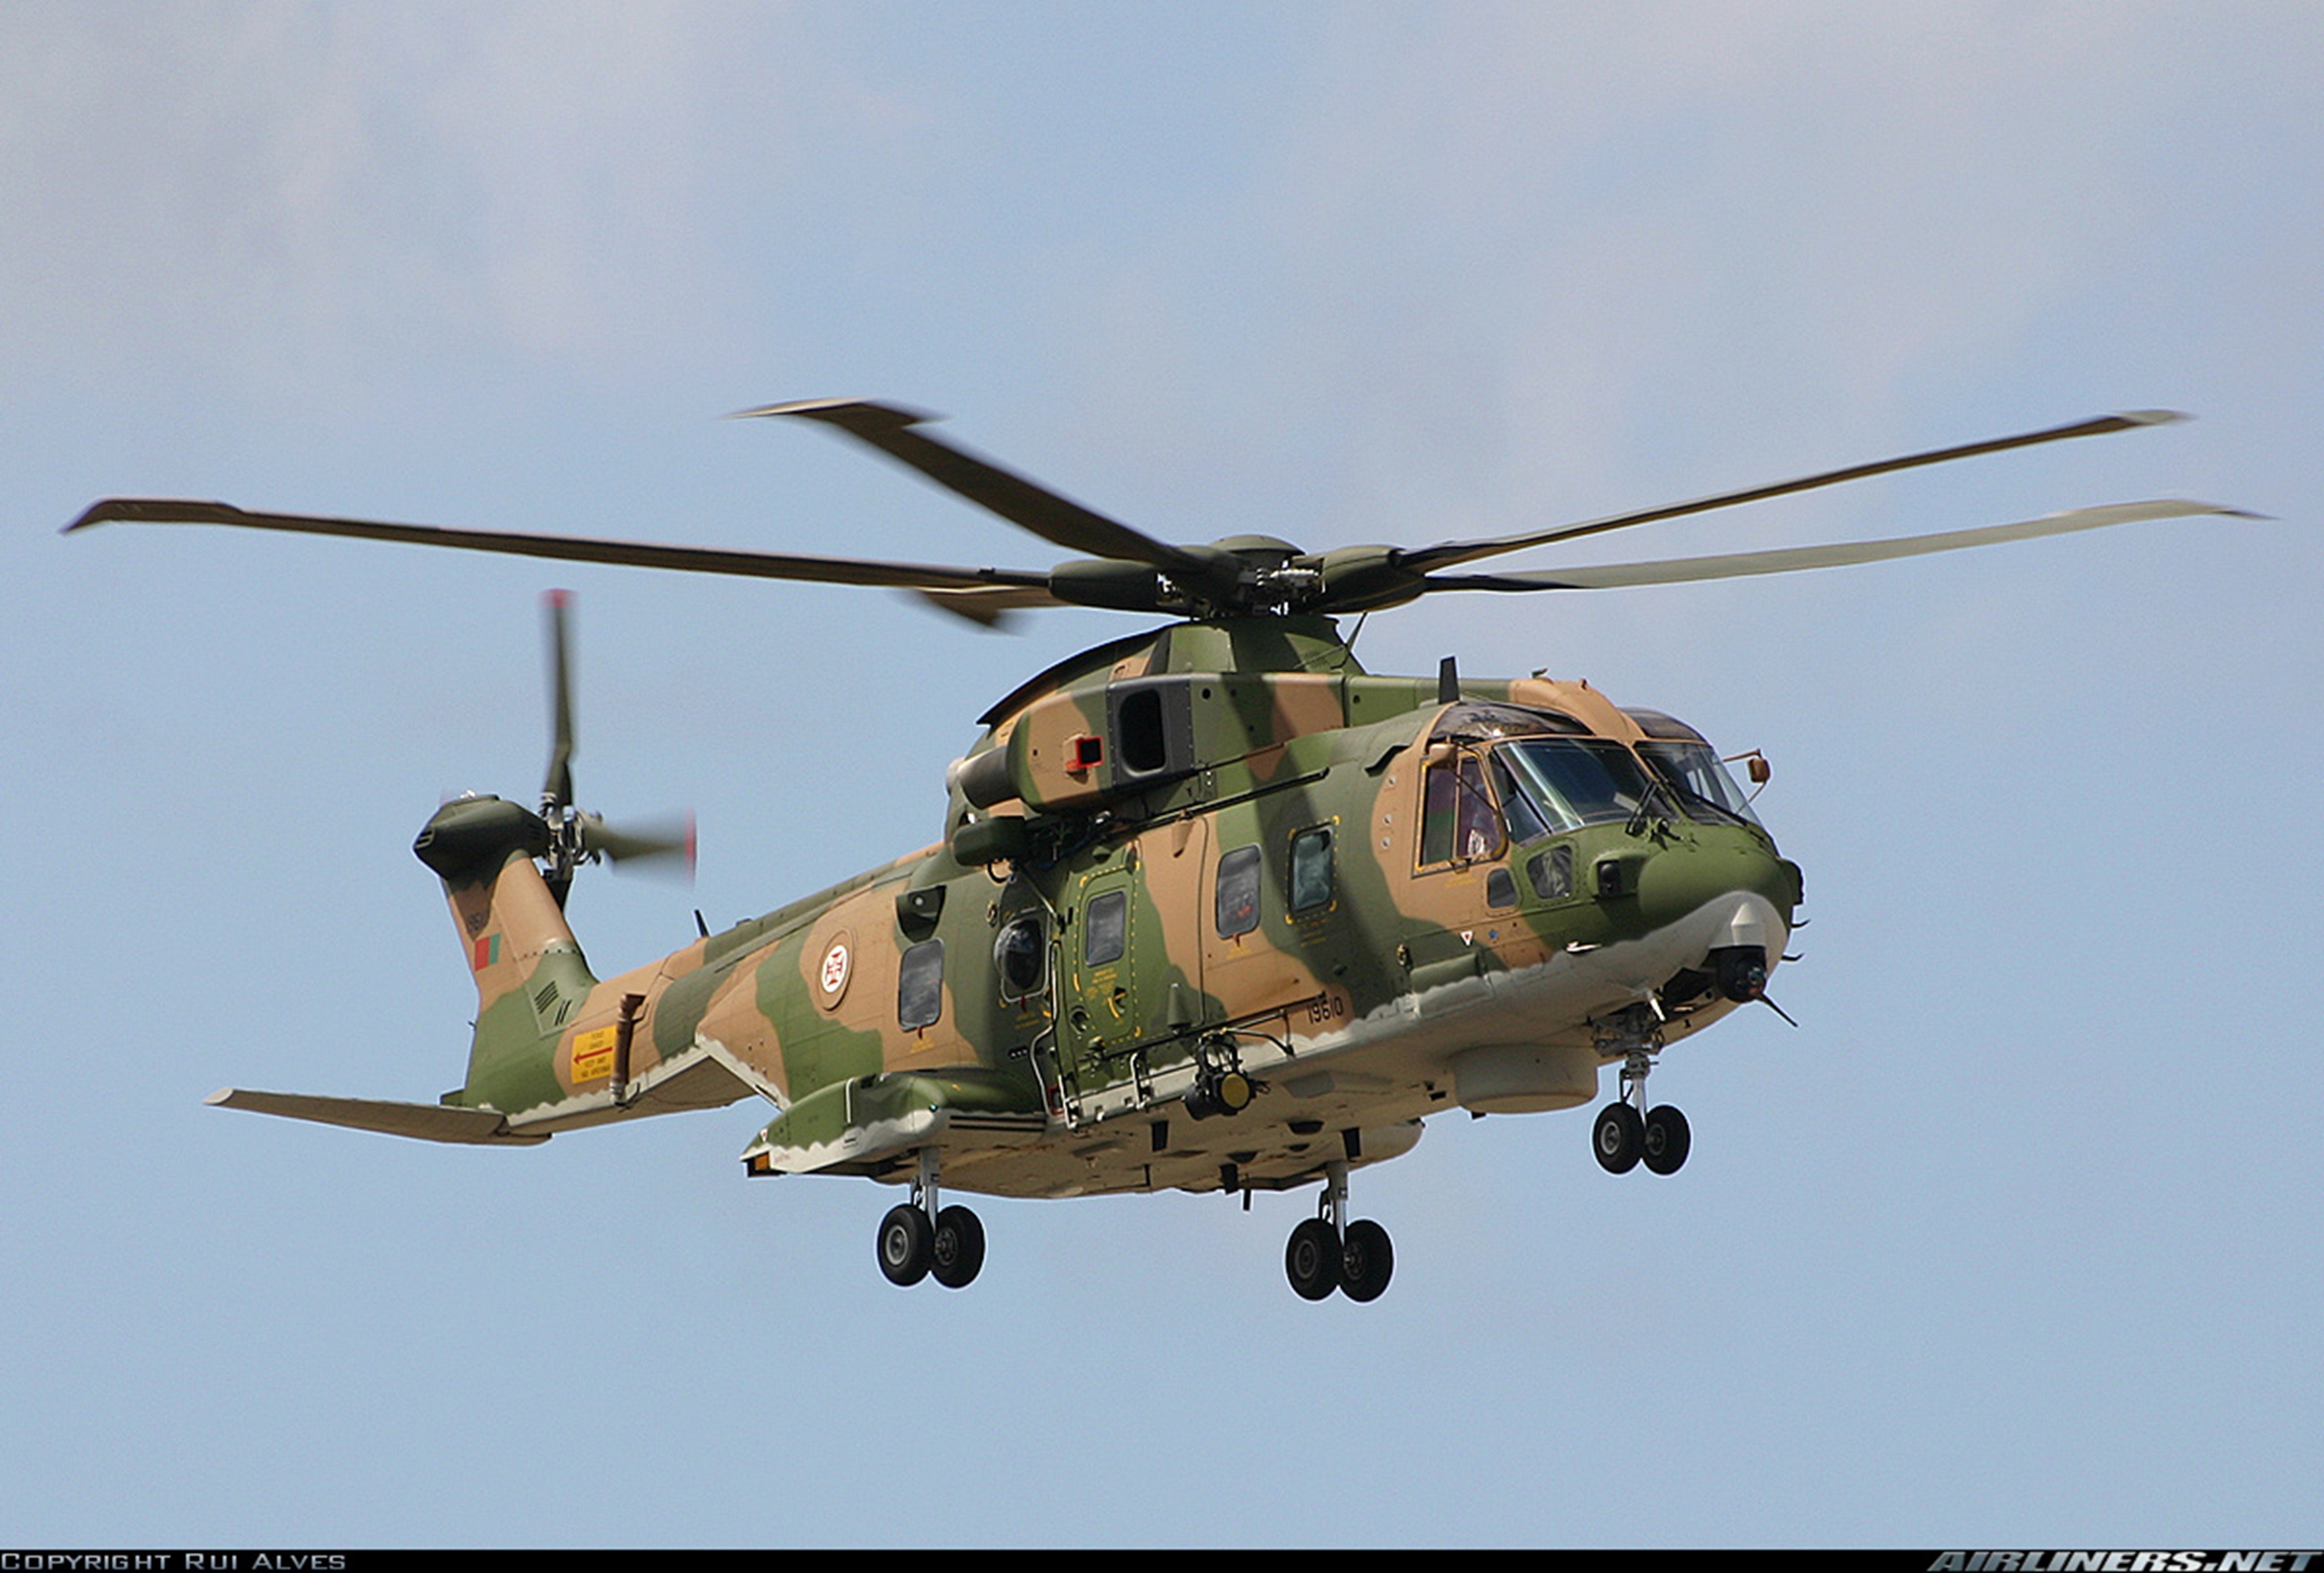 helicopter, Aircraft, Transport, Military, Army, Portugal Wallpaper